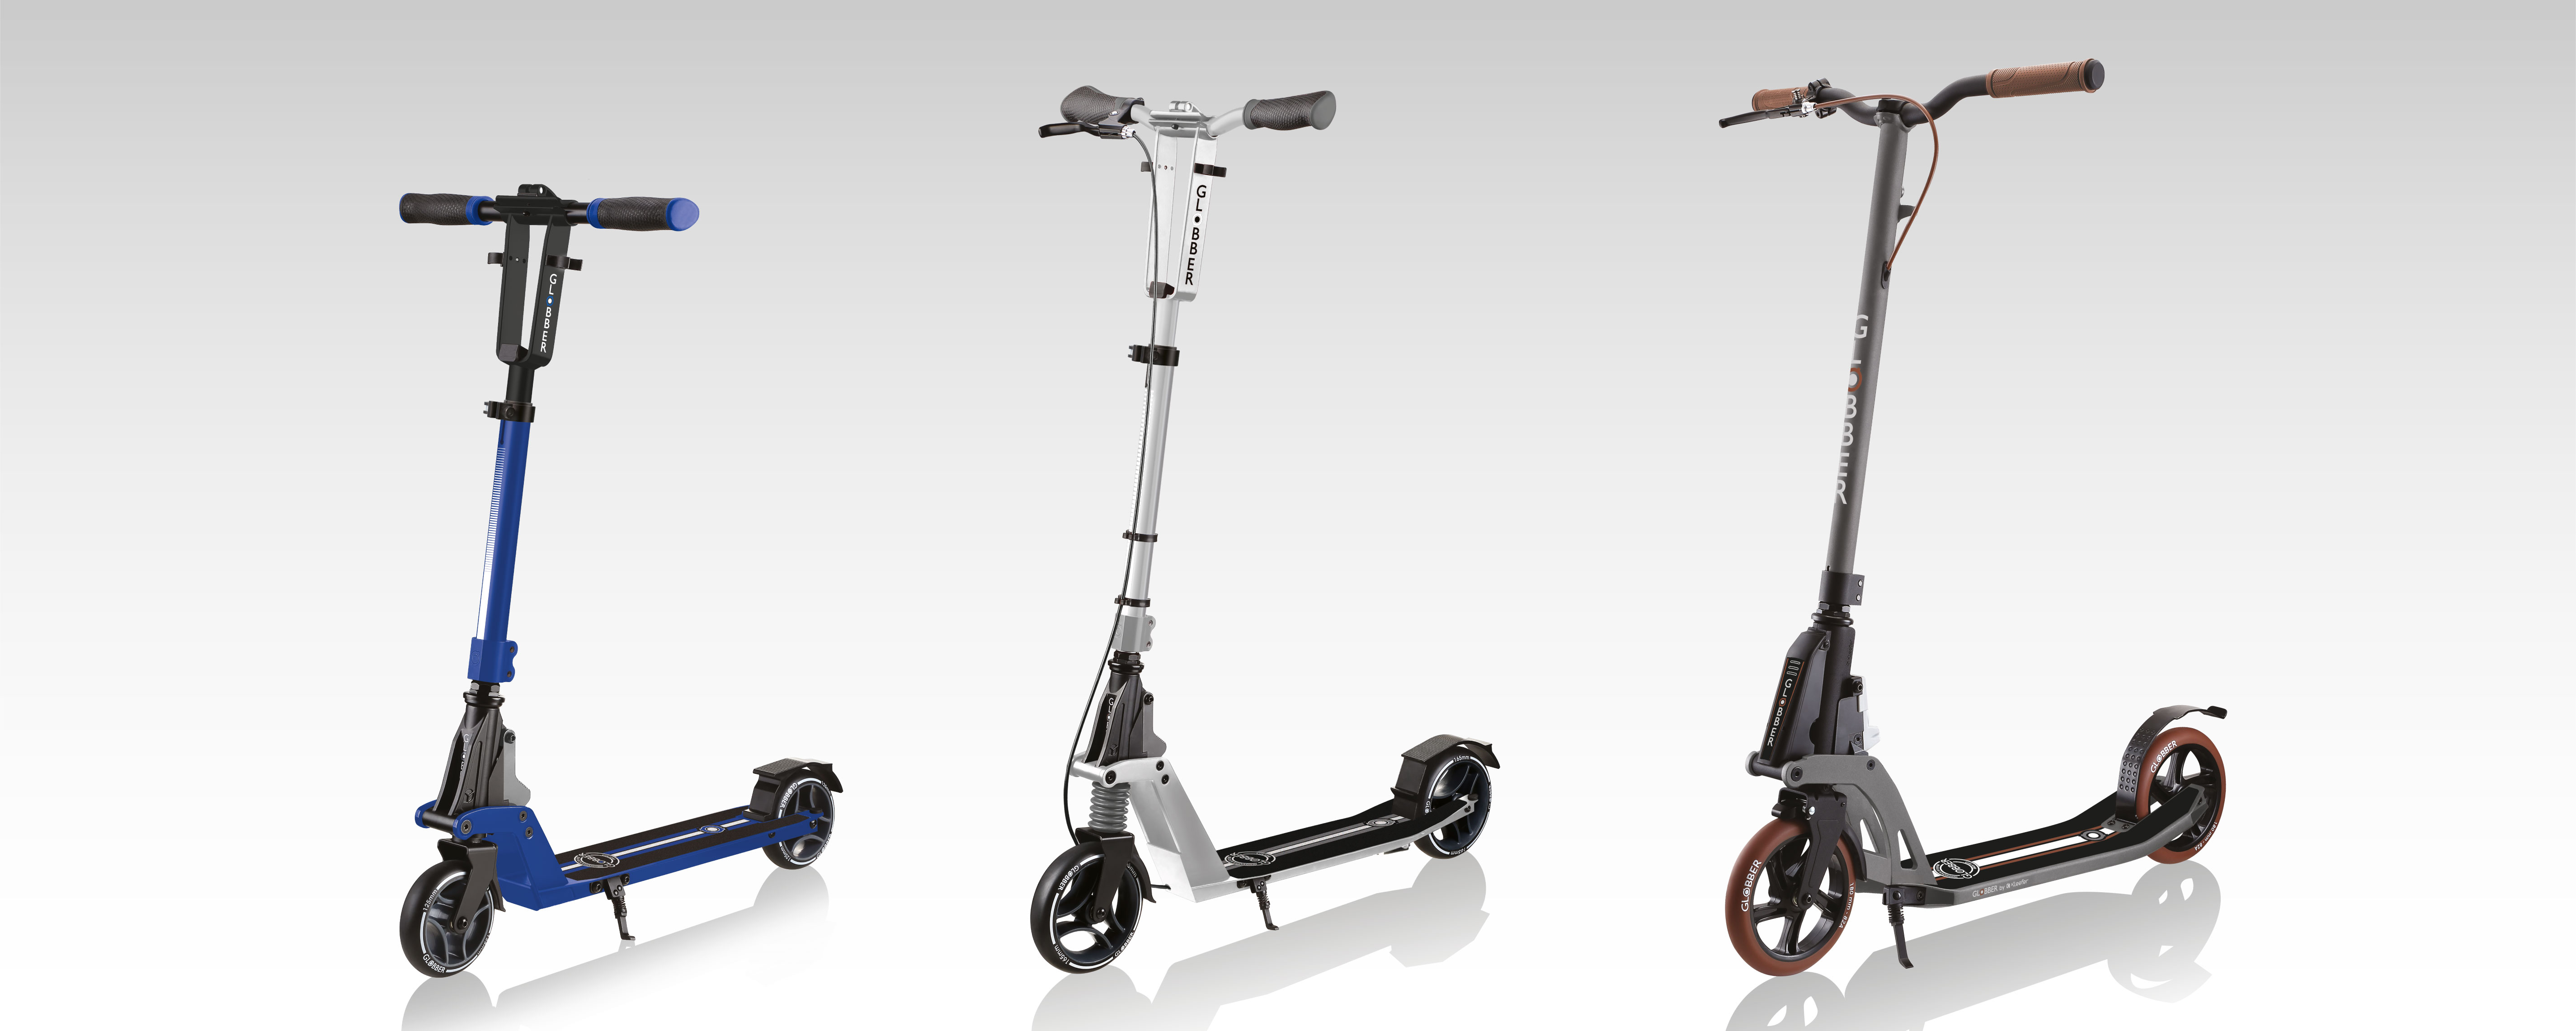 ONE K kick scooters for commuting